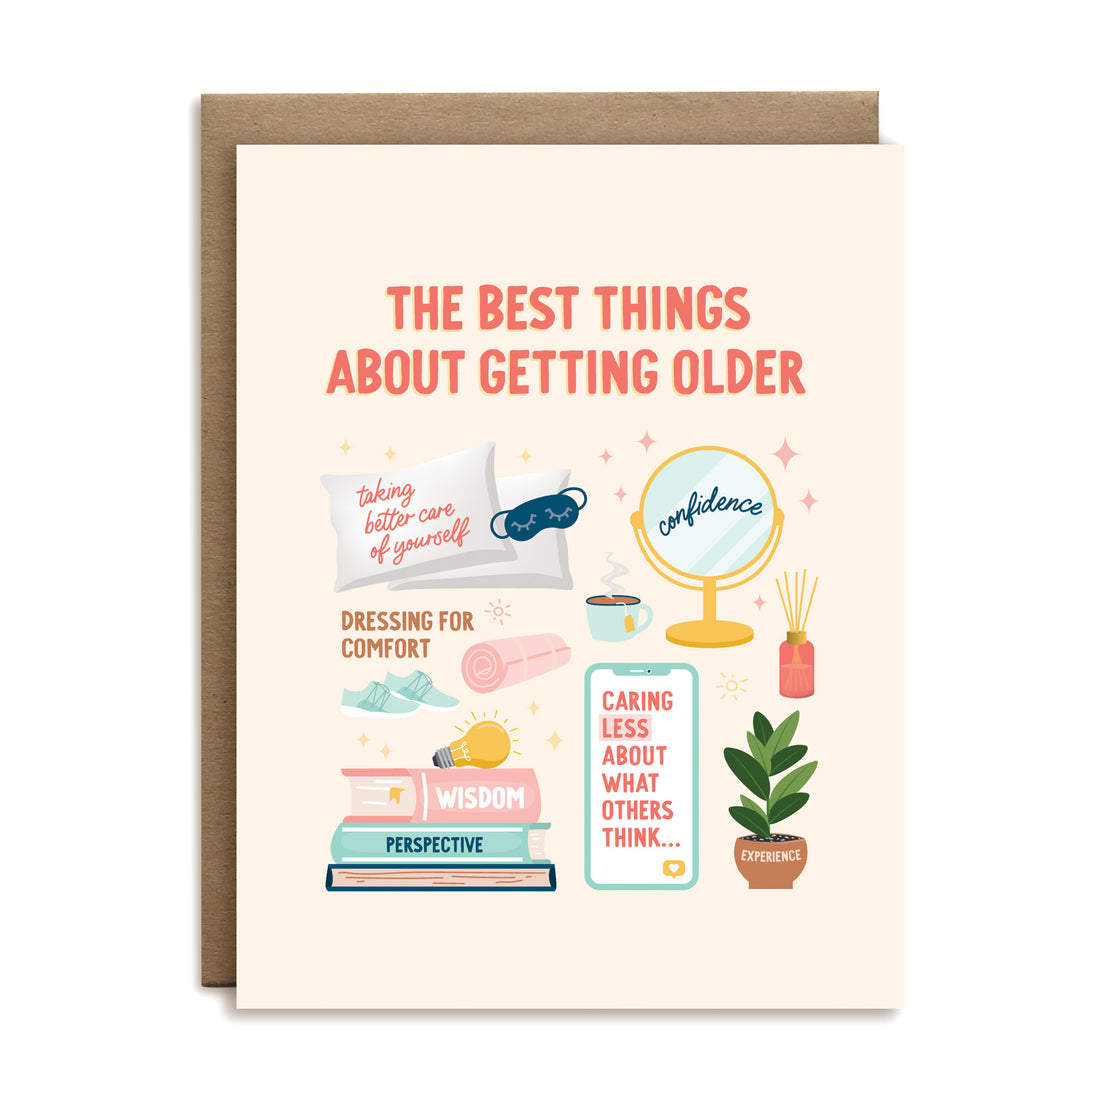 The best things about getting older birthday greeting card by I&